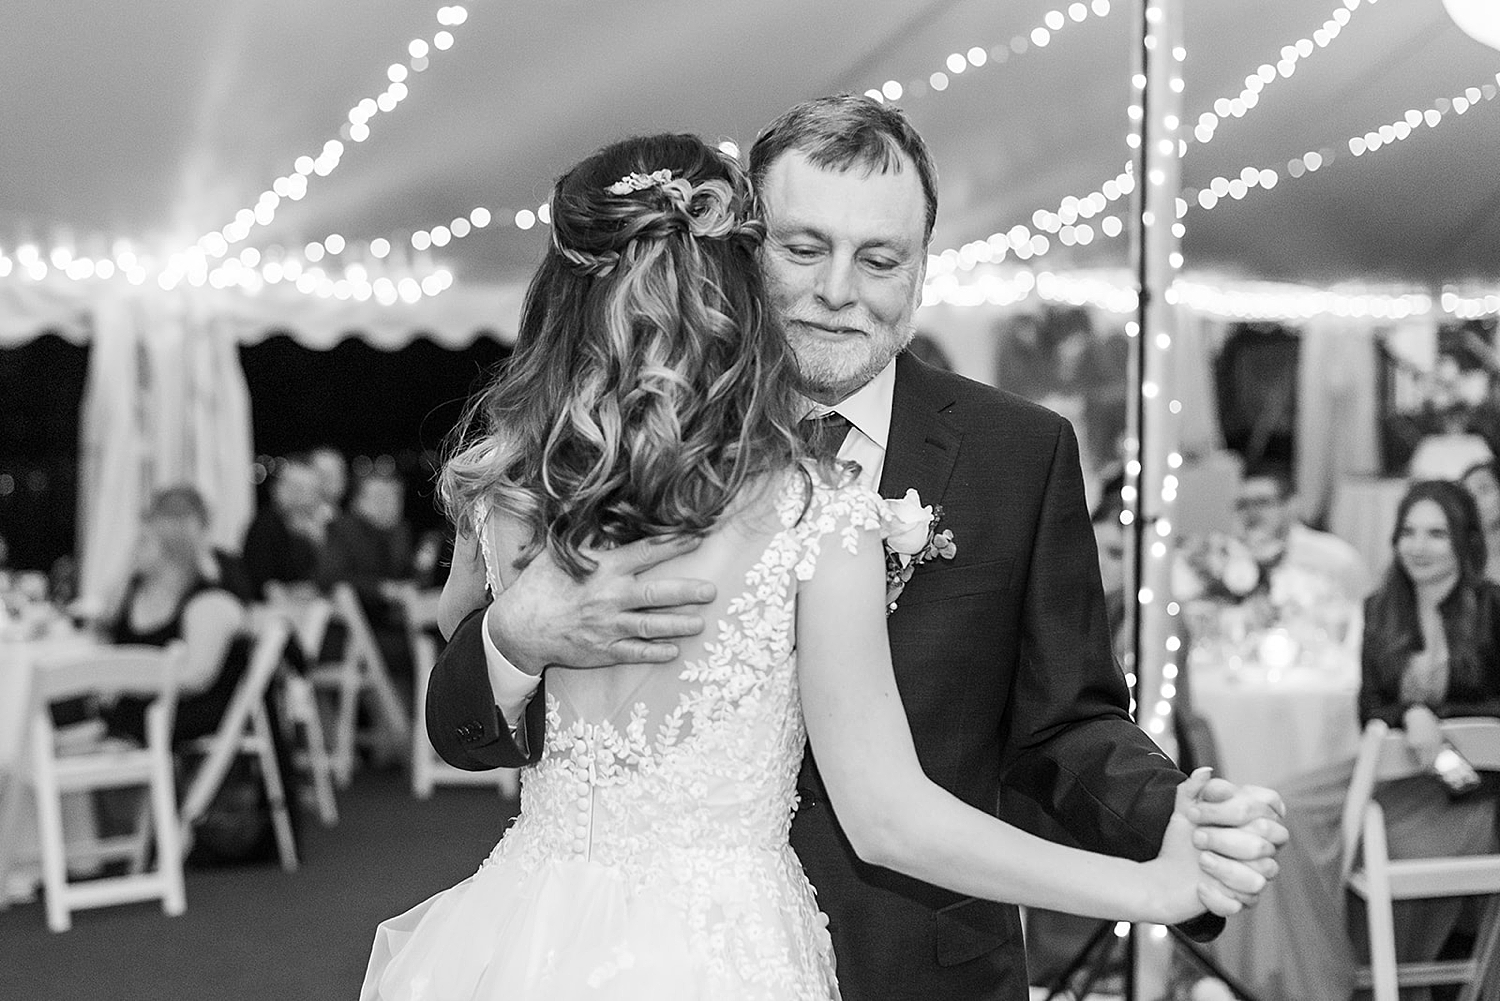 bride dances with her father at wedding reception